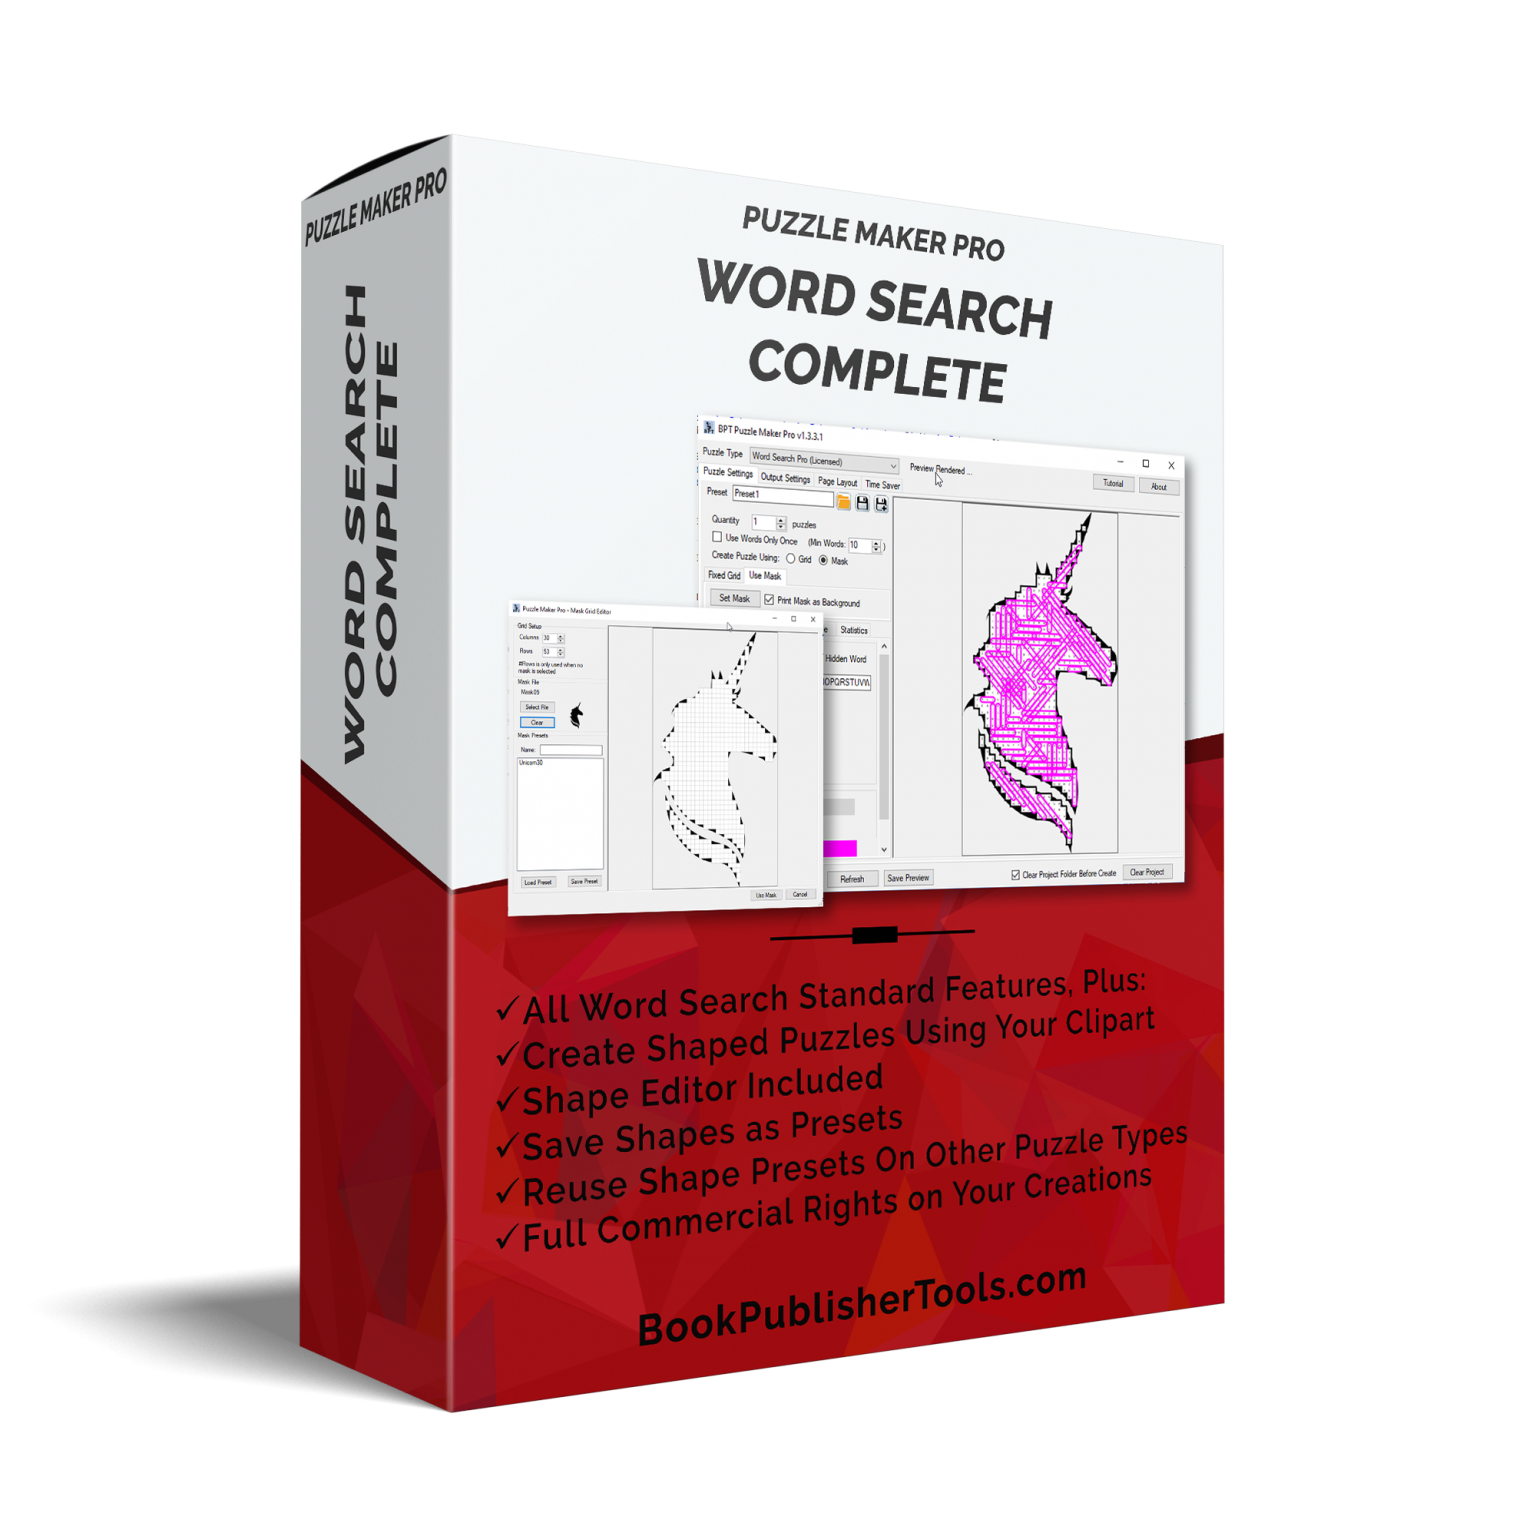 Puzzle Maker Pro Word Search Complete BookPublisherTools